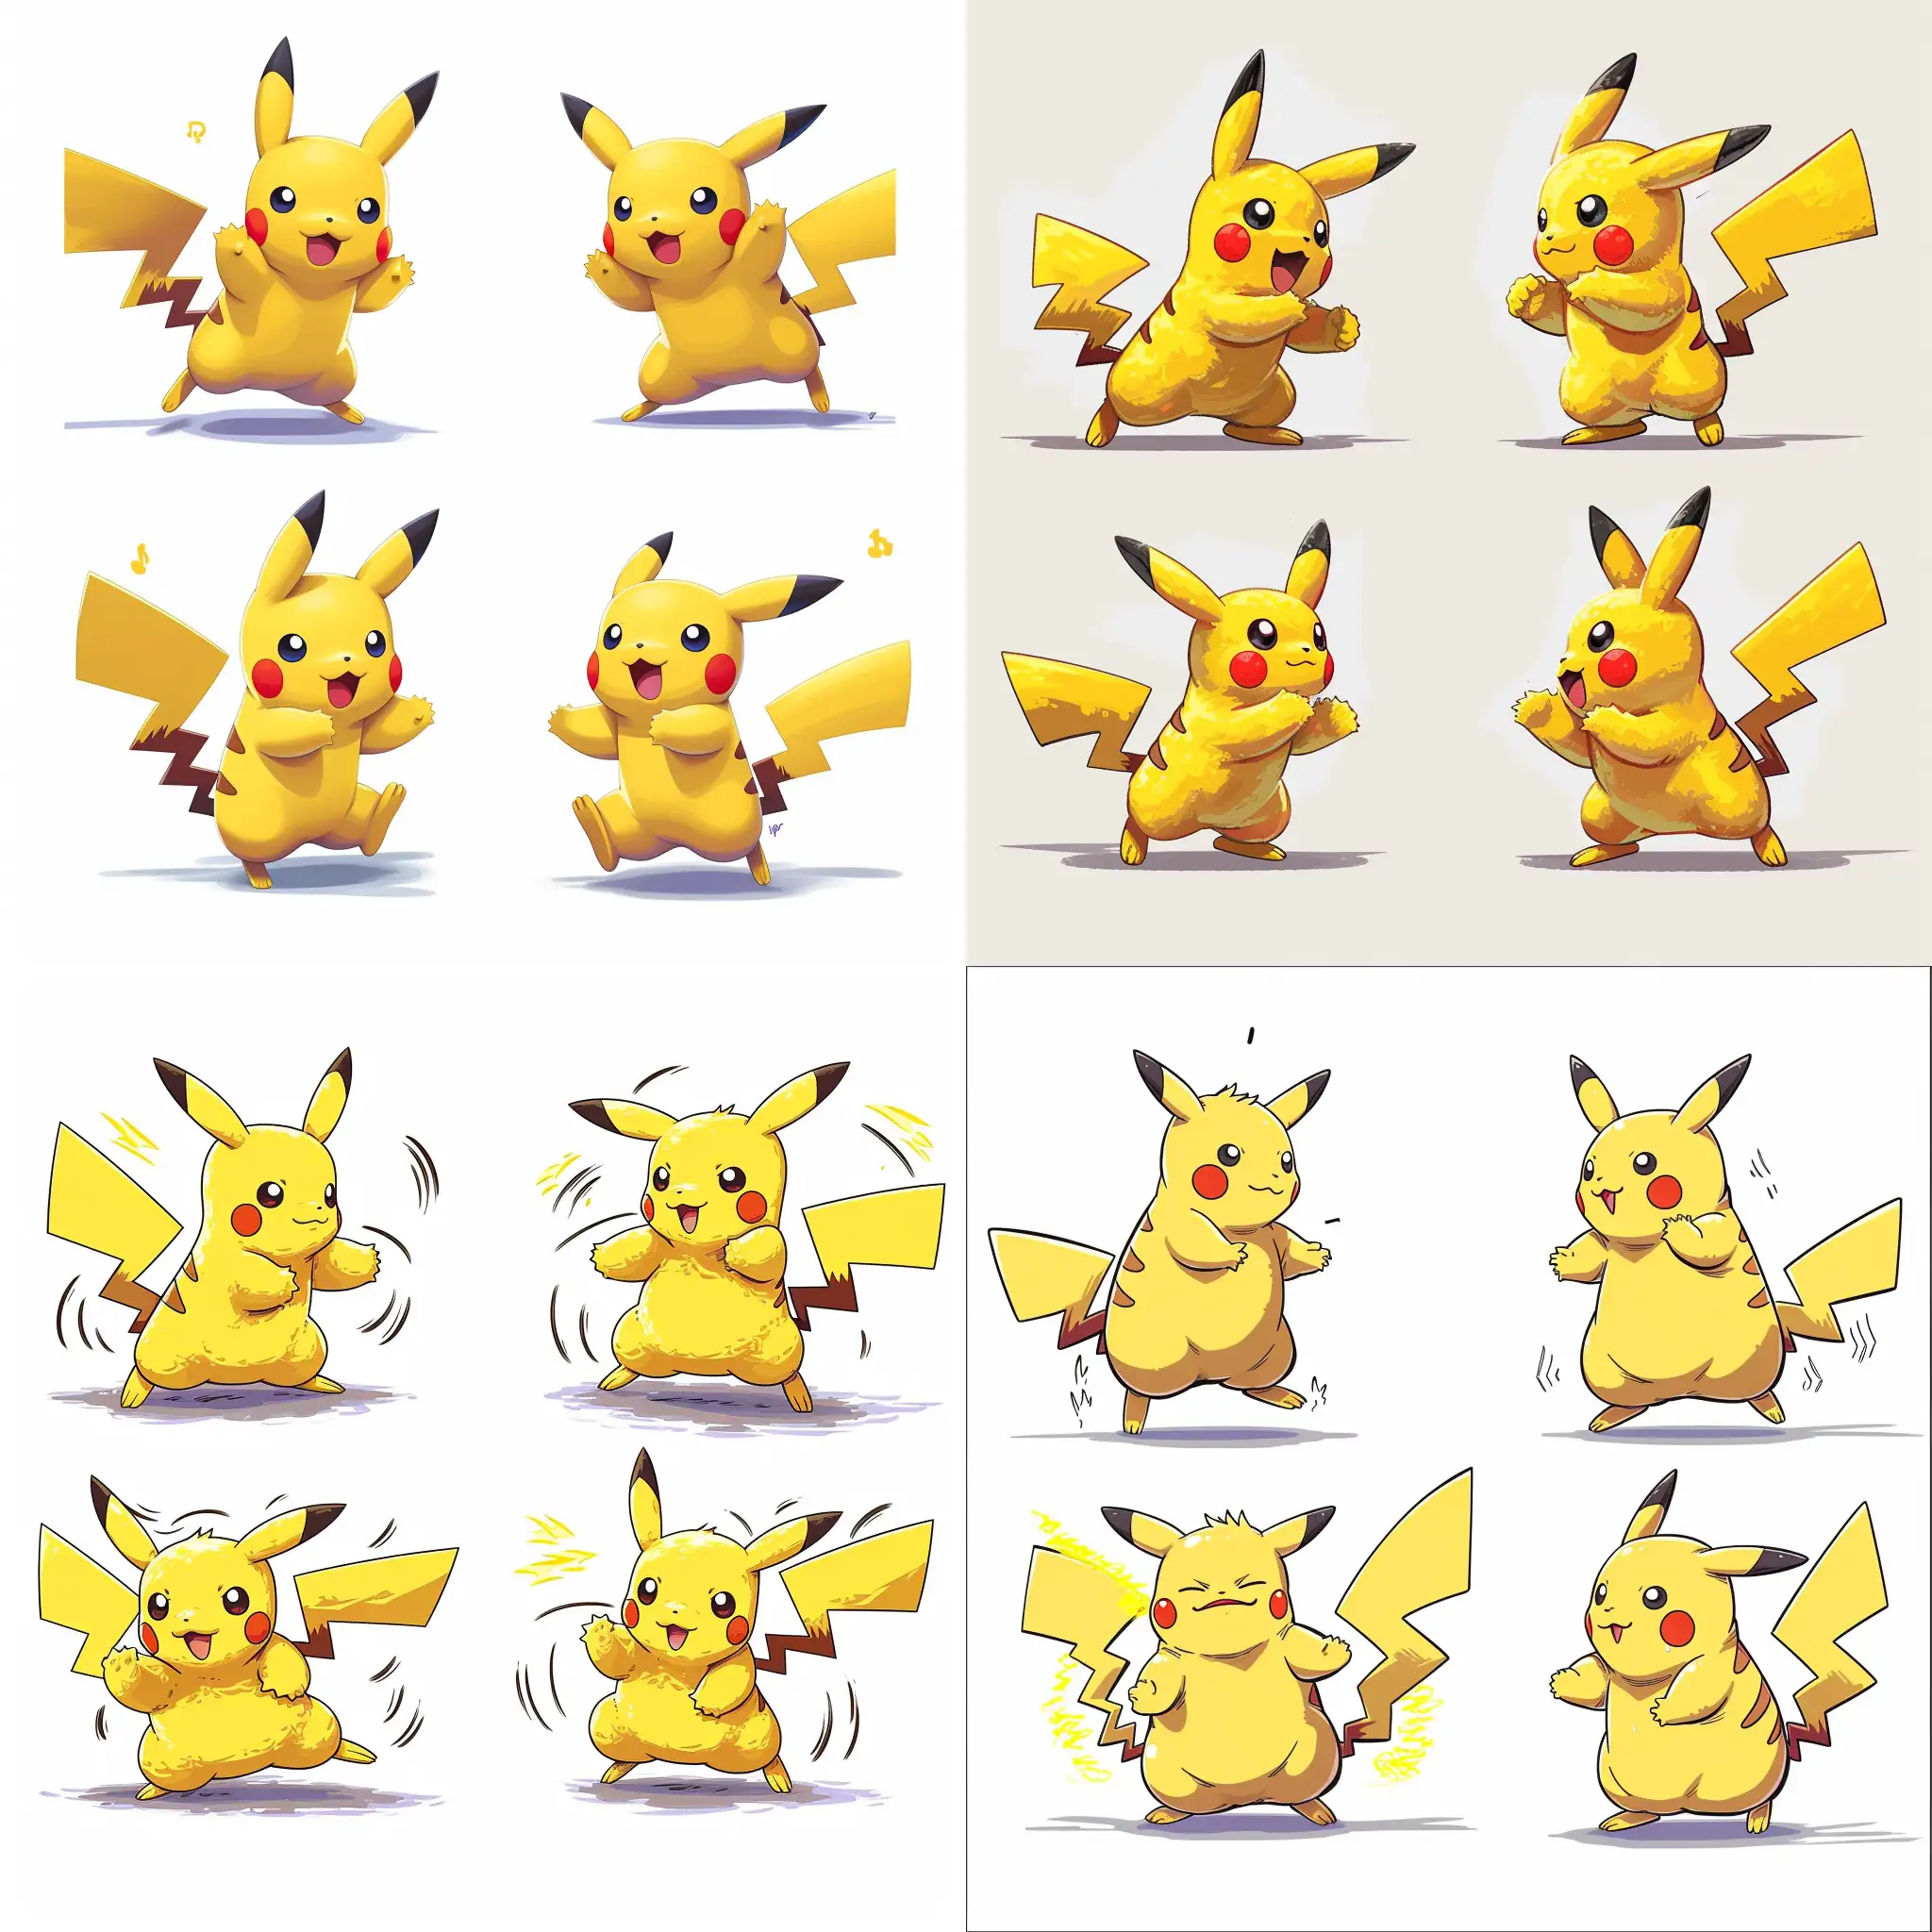 Pikachu-Sprite-Collection-North-South-East-West-Positions-with-TibiaInspired-Style